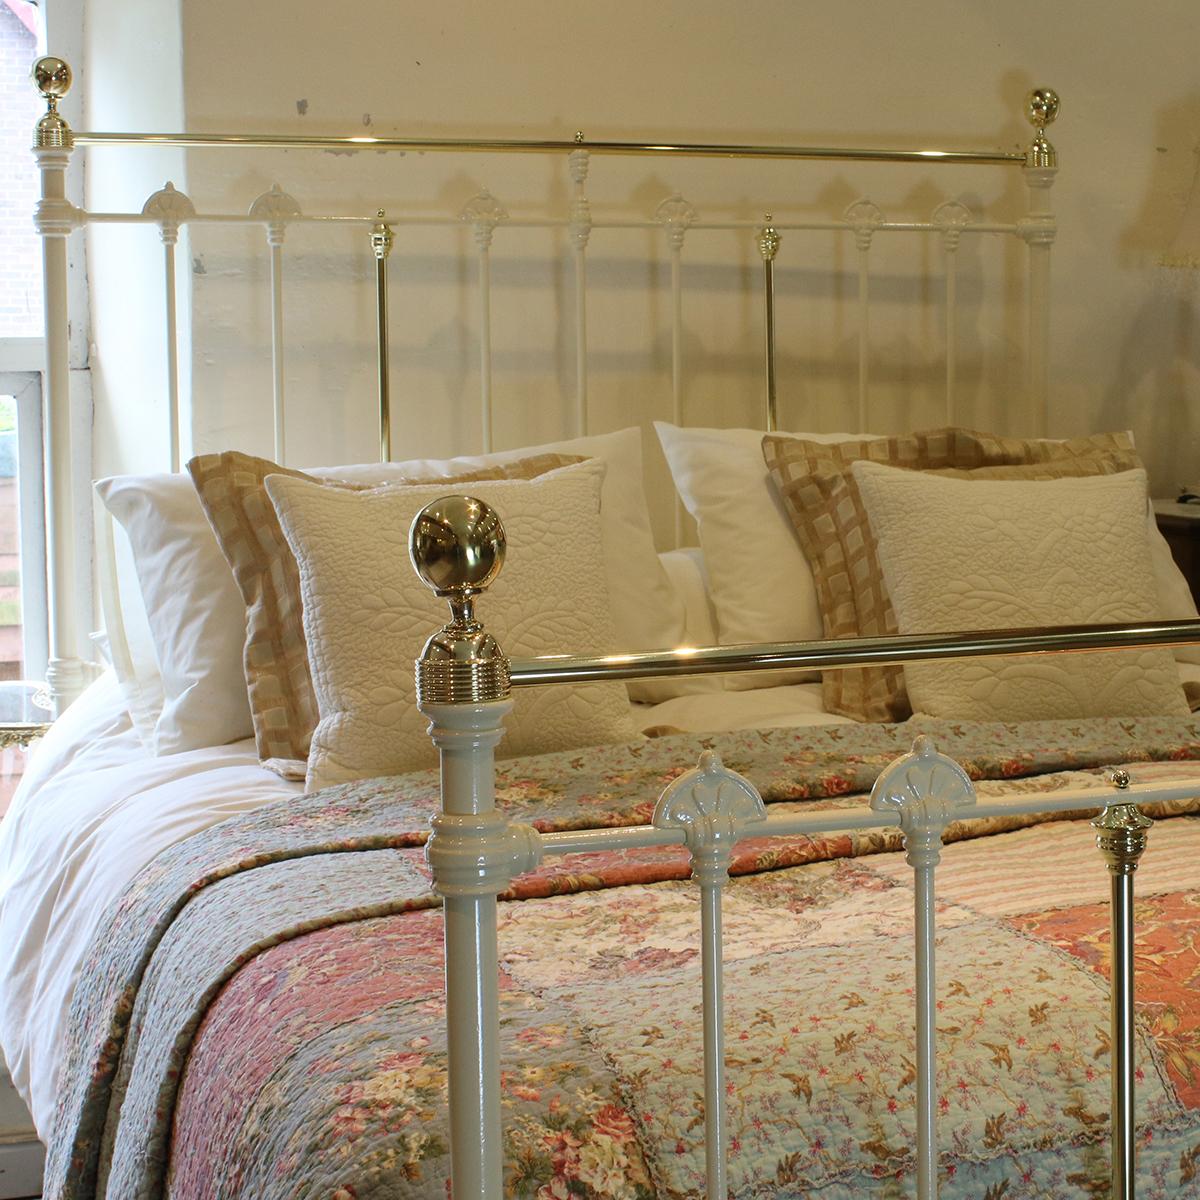 Antique bed in cream with straight brass top rail, brass knee-caps, knobs and collars, and large decorative castings. 

This bed accepts a UK King size or US Queen size (5 ft, 60 in or 150 cm wide) base and mattress set.

The price is for the